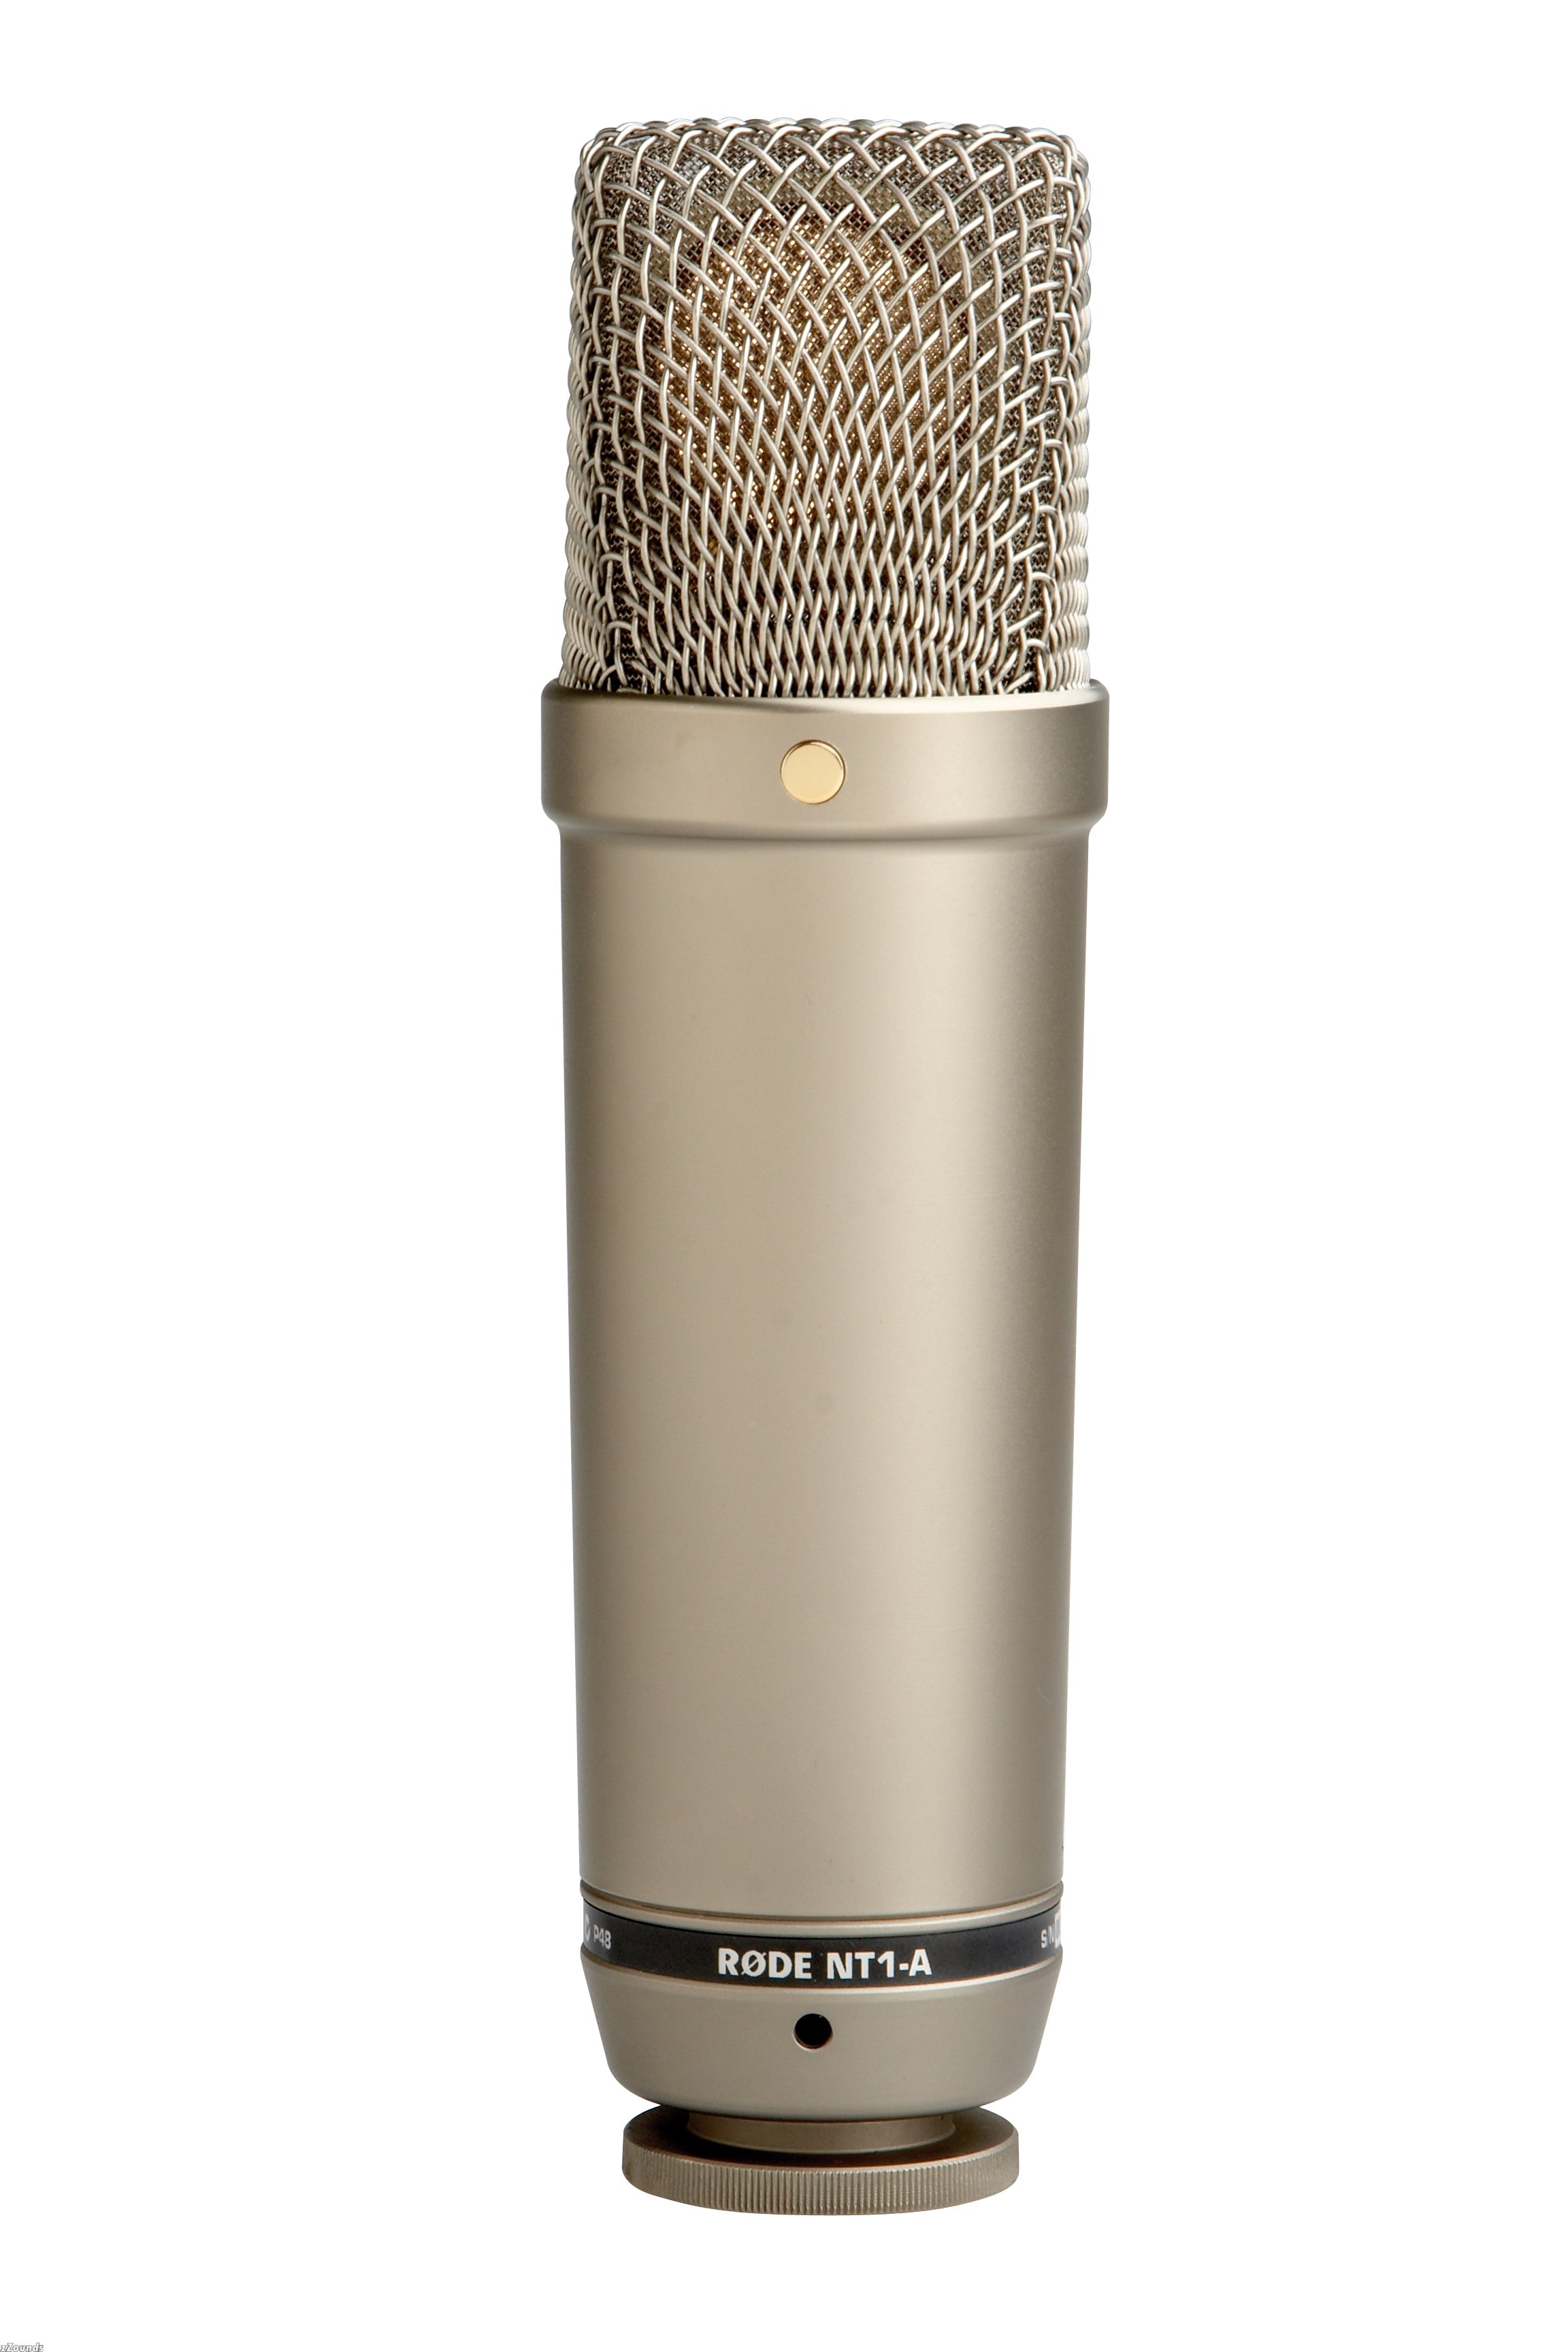 RODE Rode NT1-A Microphone